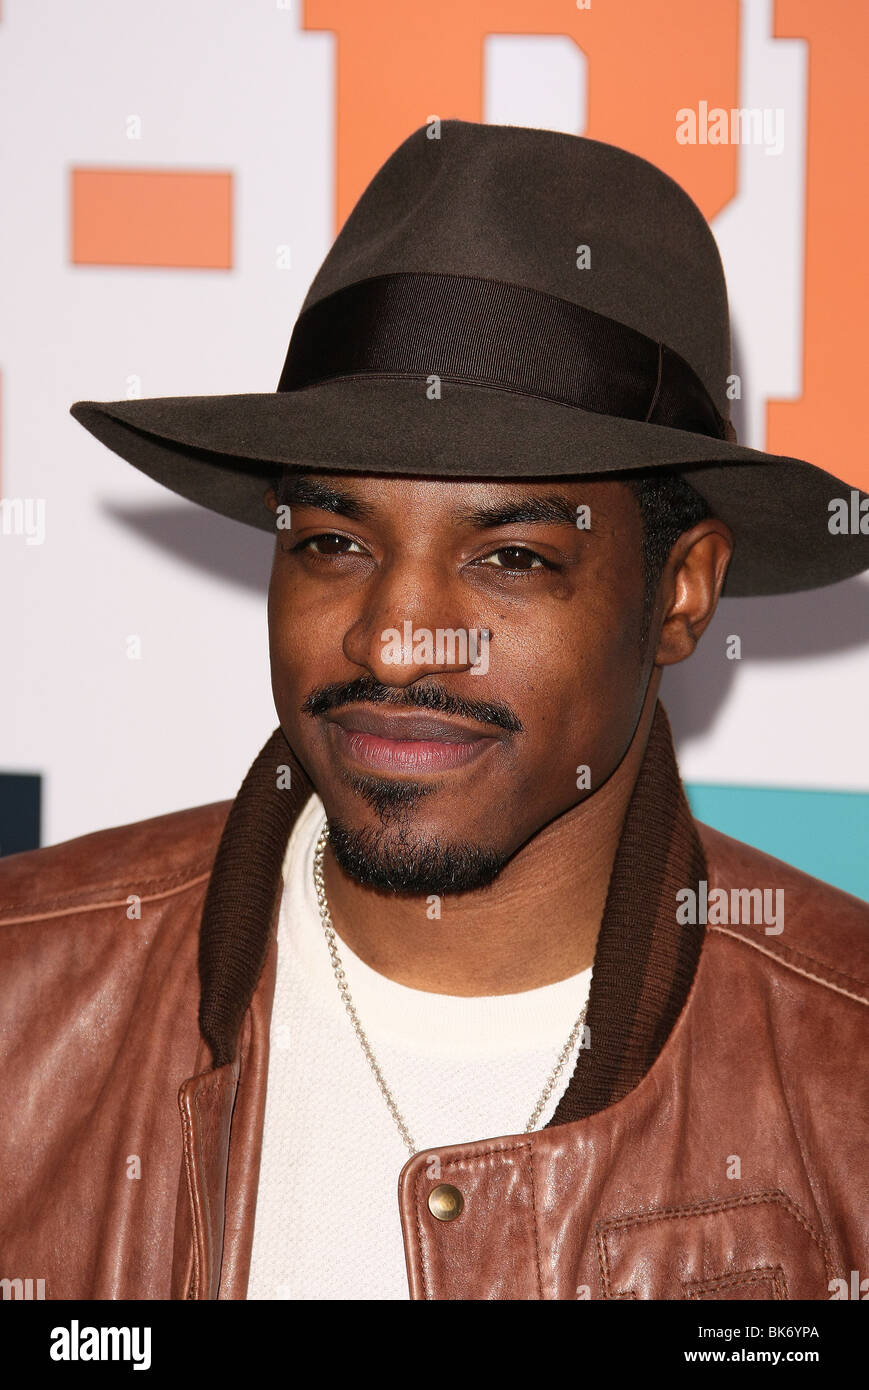 Andre 3000 Stock Photos & Andre 3000 Stock Images - Alamy